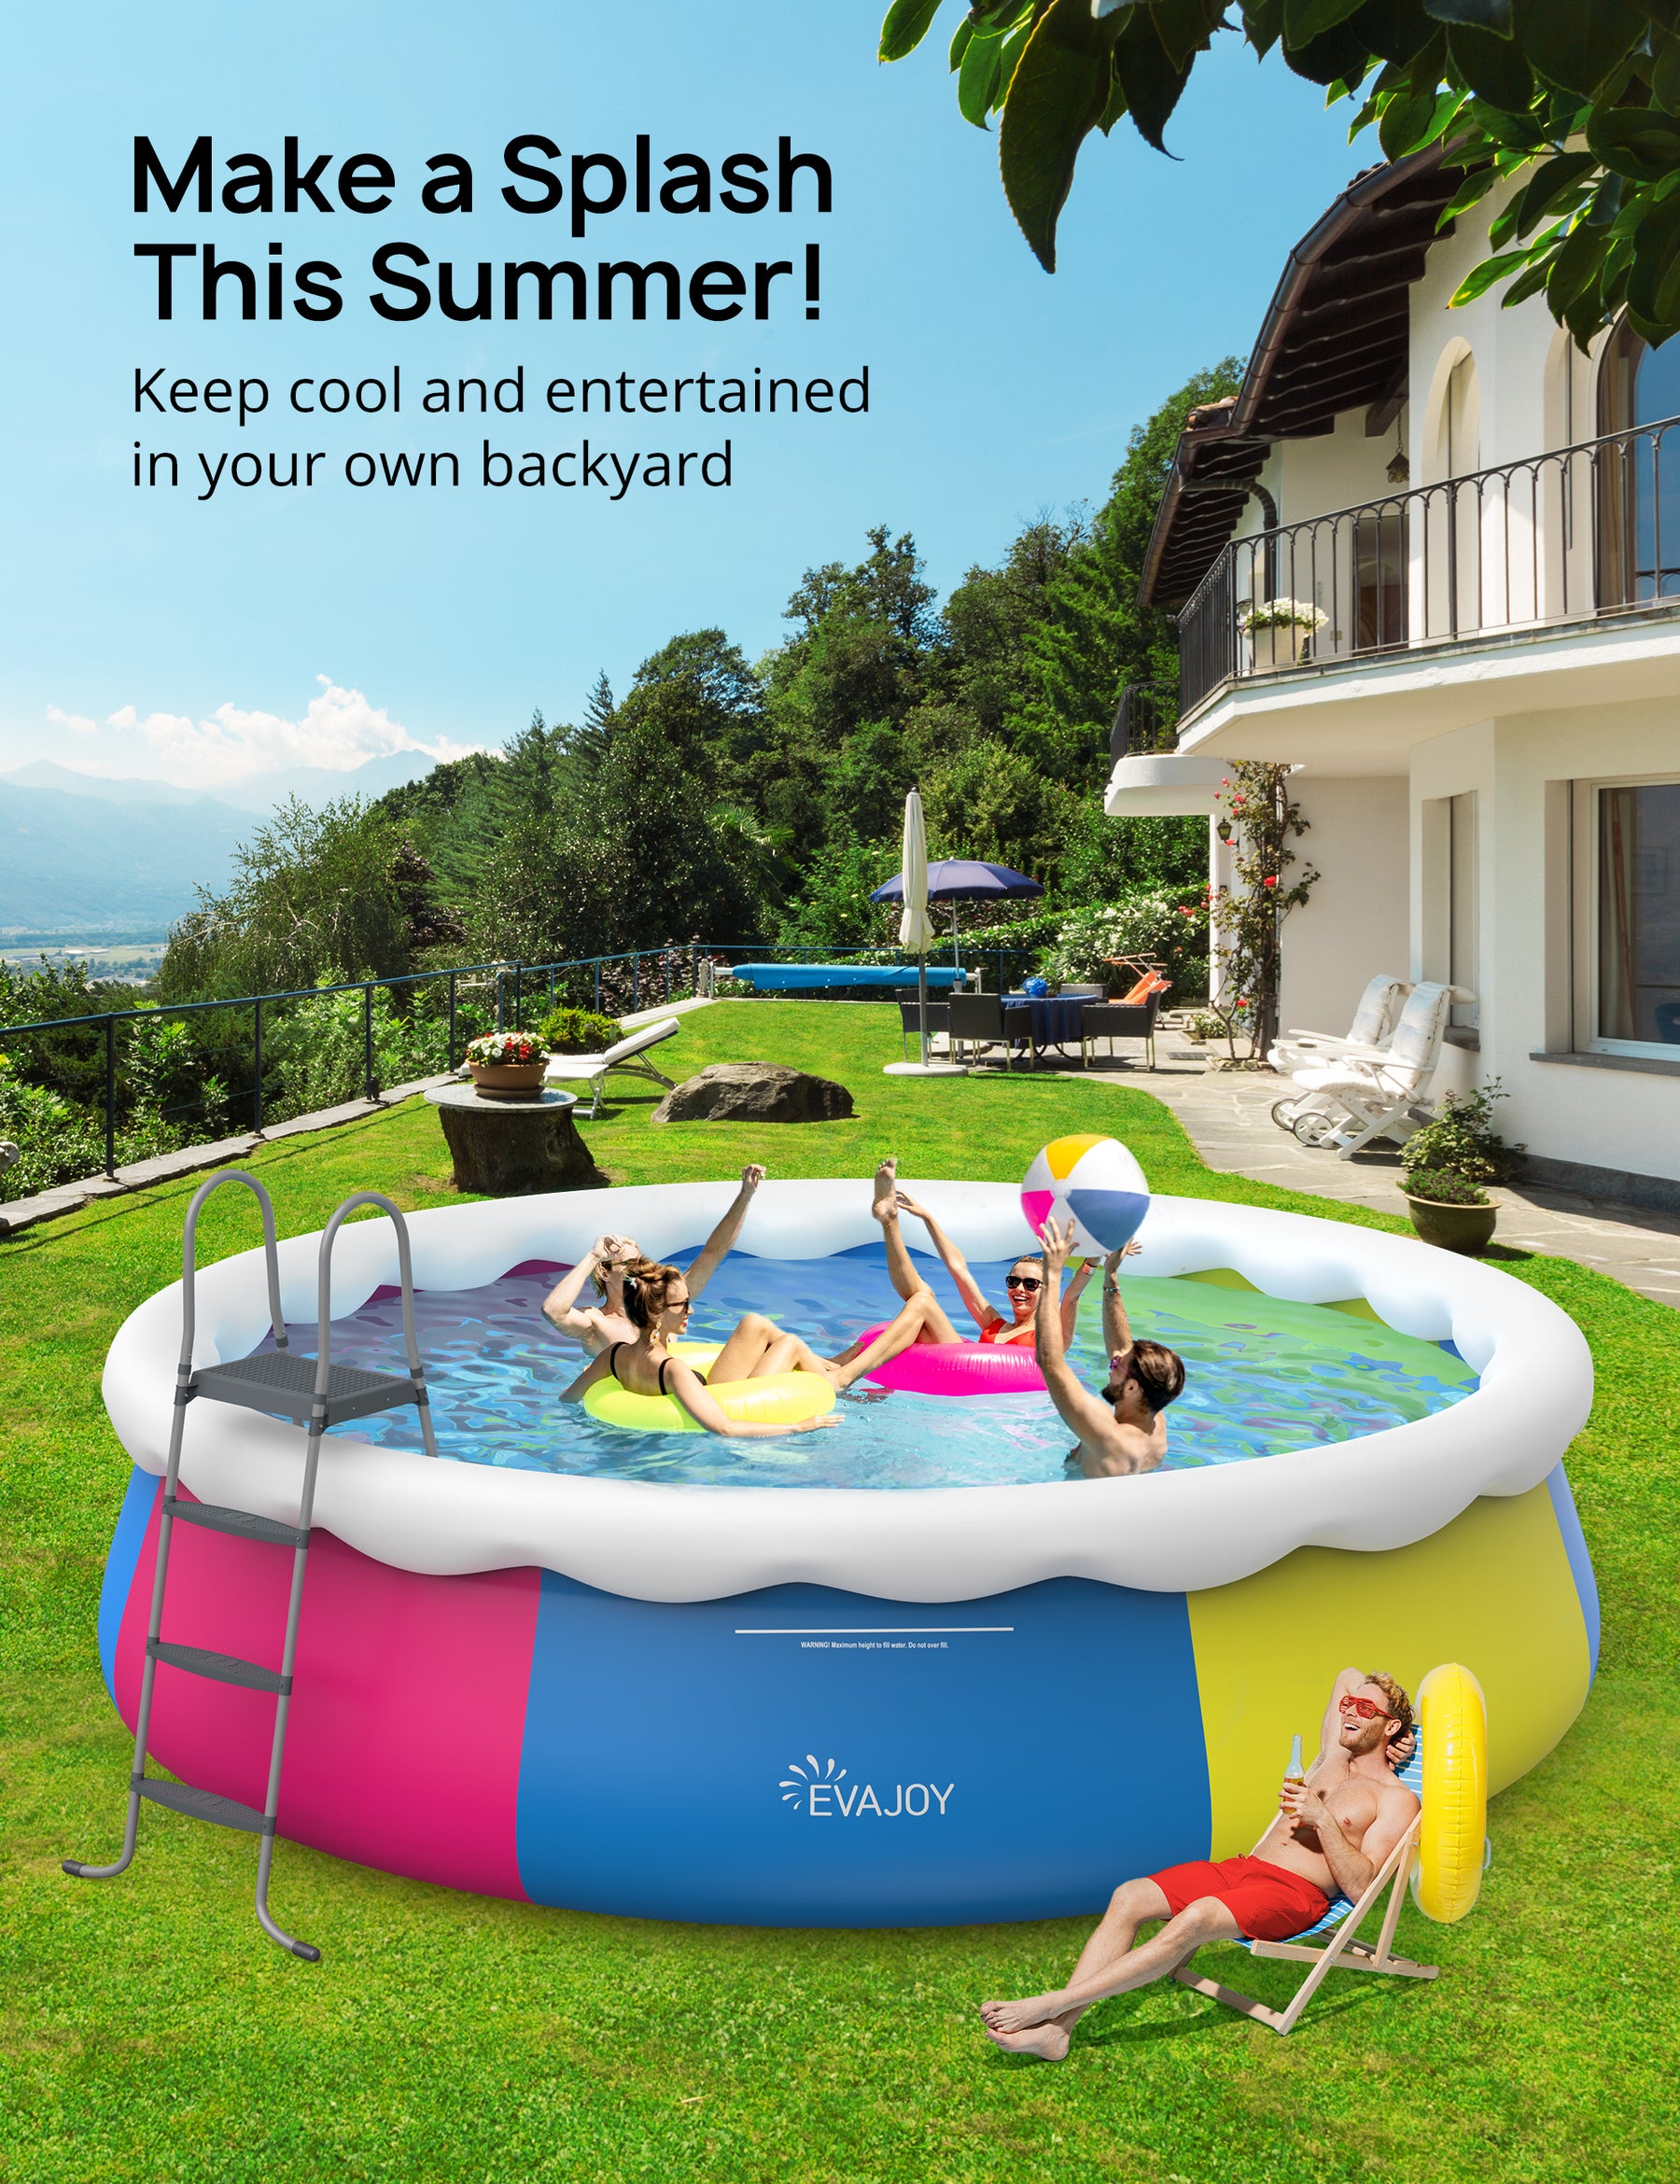 Evajoy Inflatable Swimming Pool, 18ft*48in Inflatable Top Ring Pool with Pool Cover